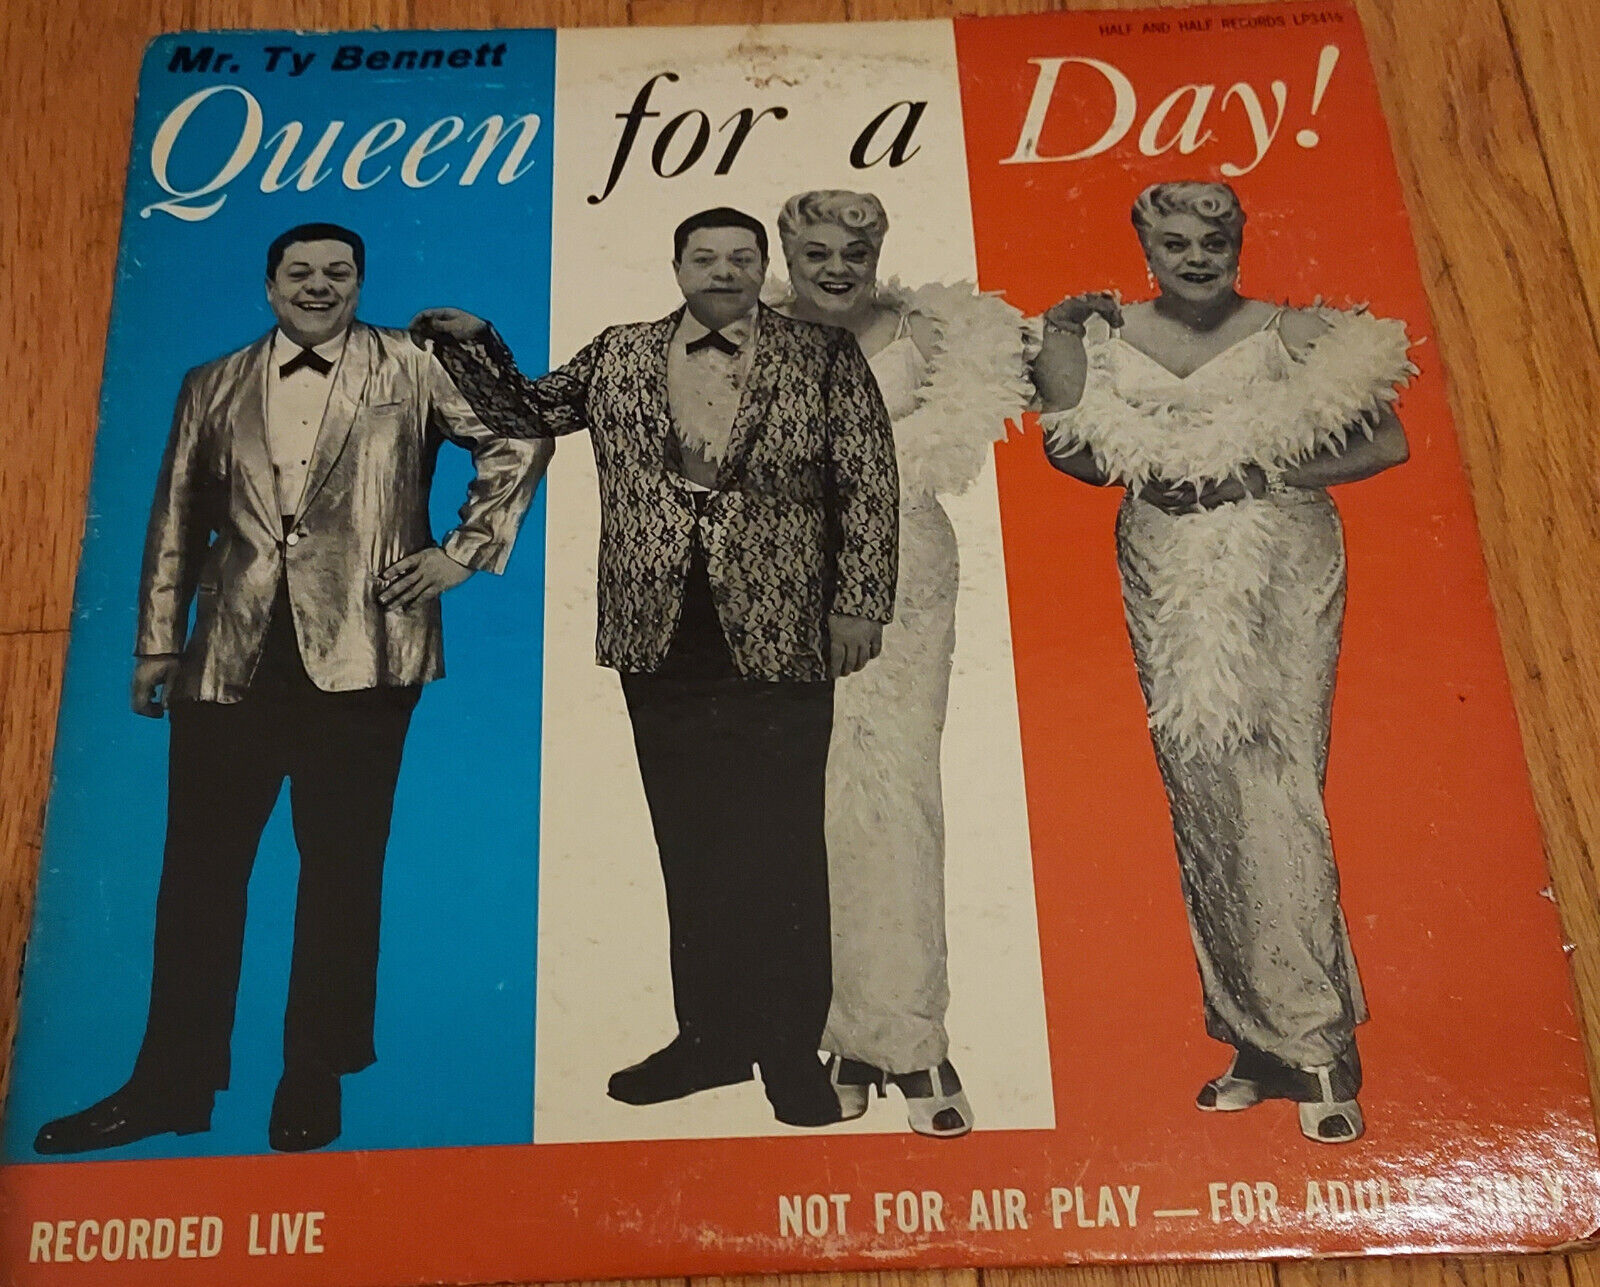 Lot of 3 vintage drag queen vinyl LPs - LGBT interest SIGNED Tubby Boots